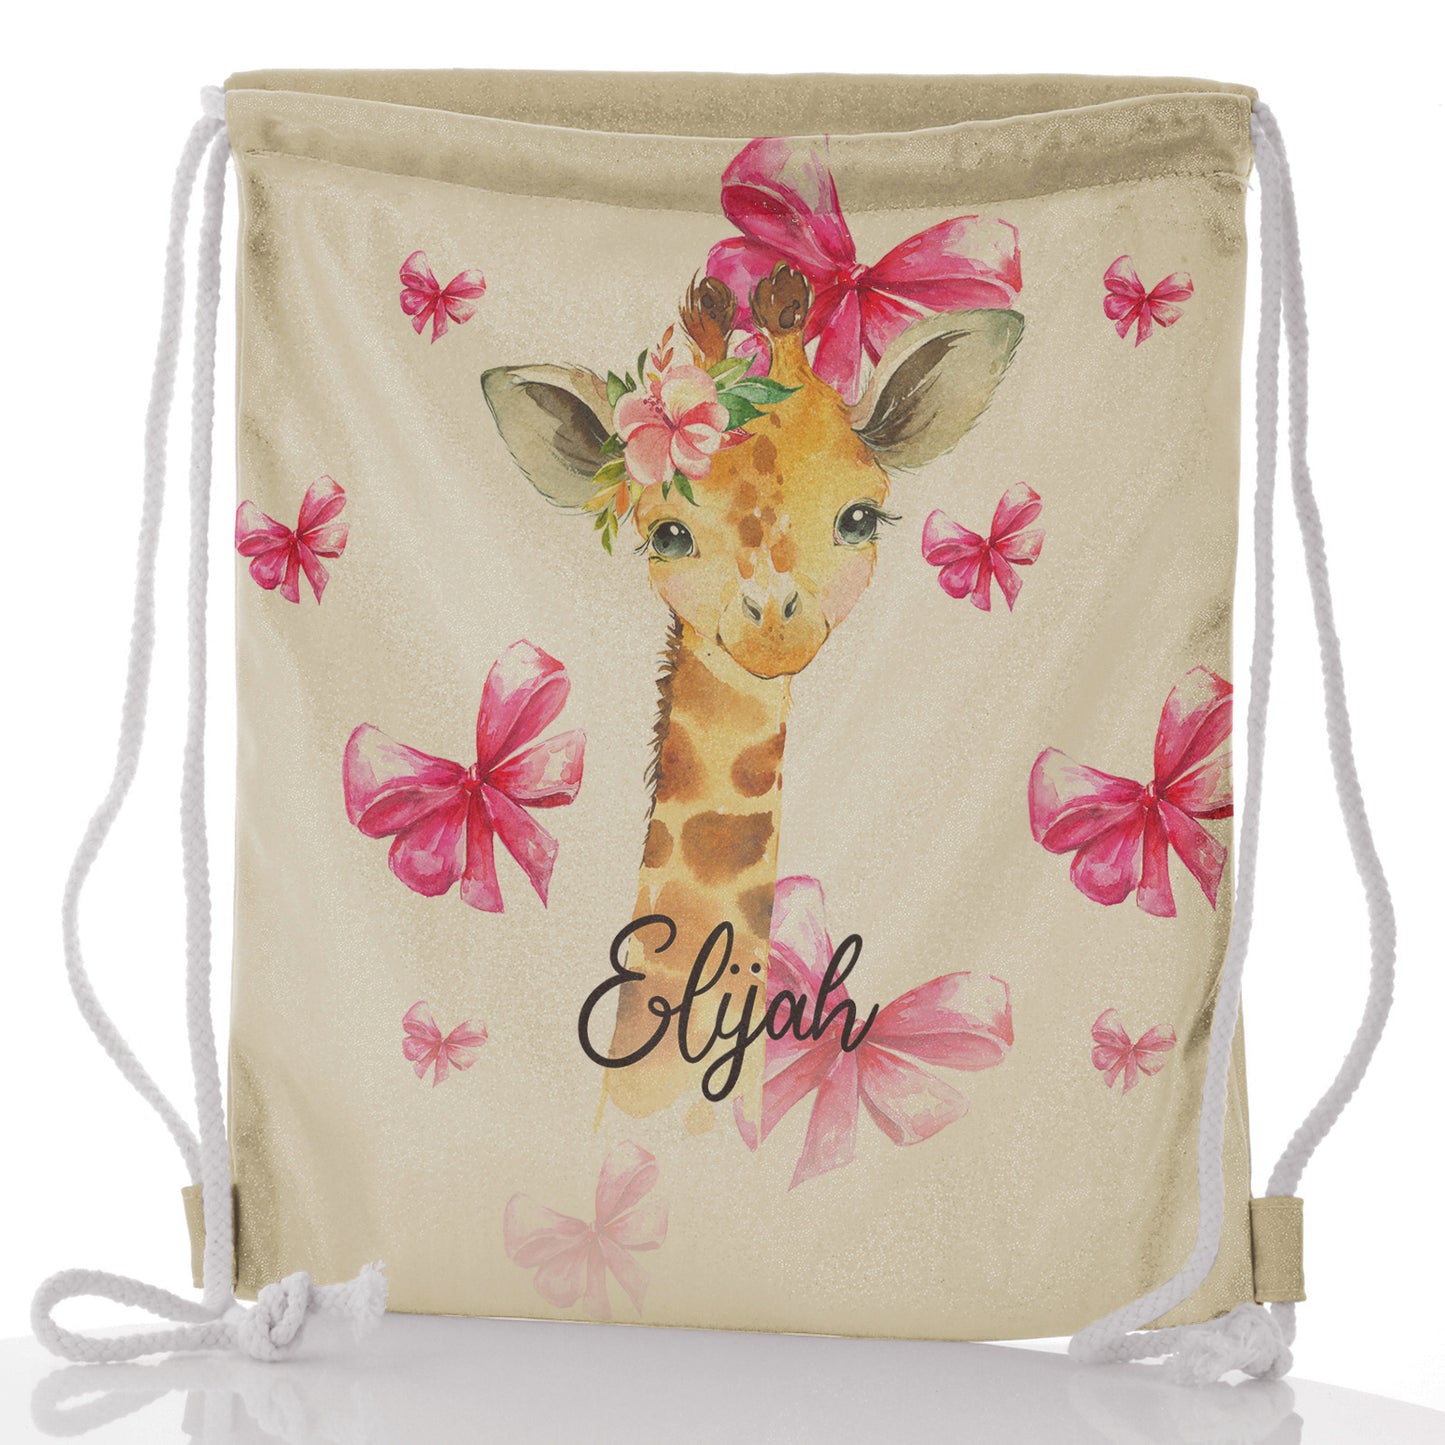 Personalised Glitter Drawstring Backpack with Giraffe Pink Bows and Cute Text